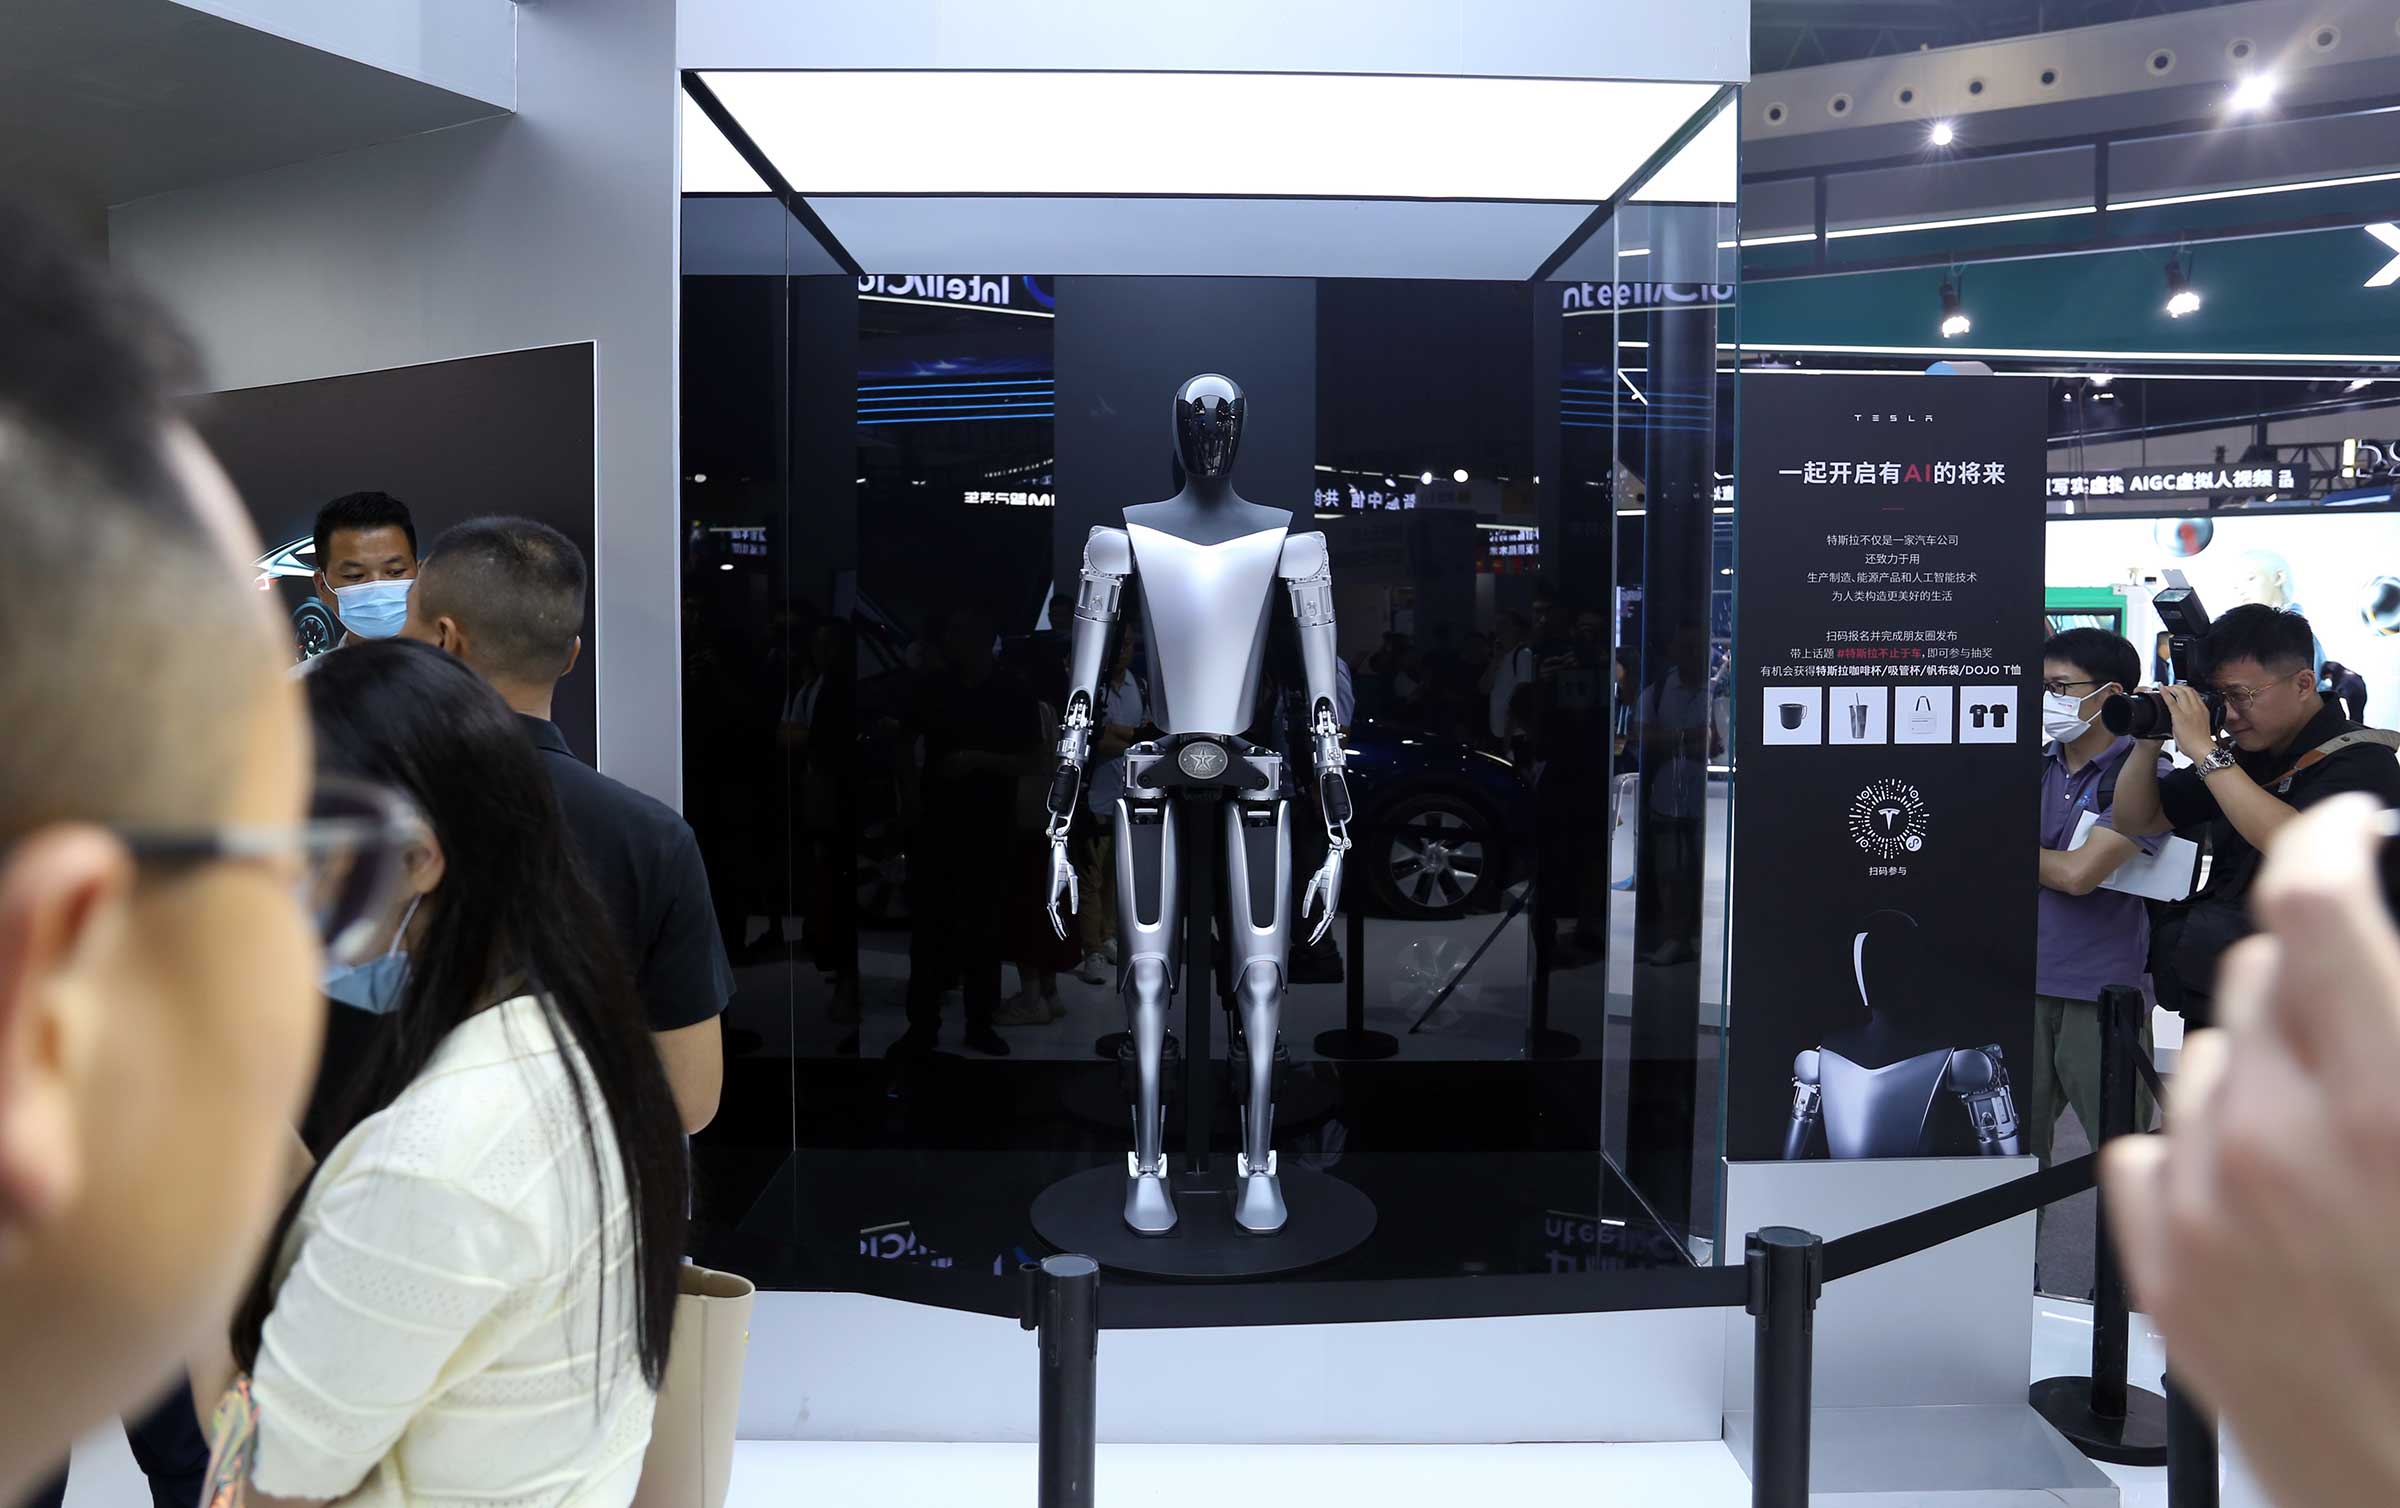 Humanlike robot "Optimus" is one of many AI-related projects launched by Musk. (Costfoto/NurPhoto/Reuters)